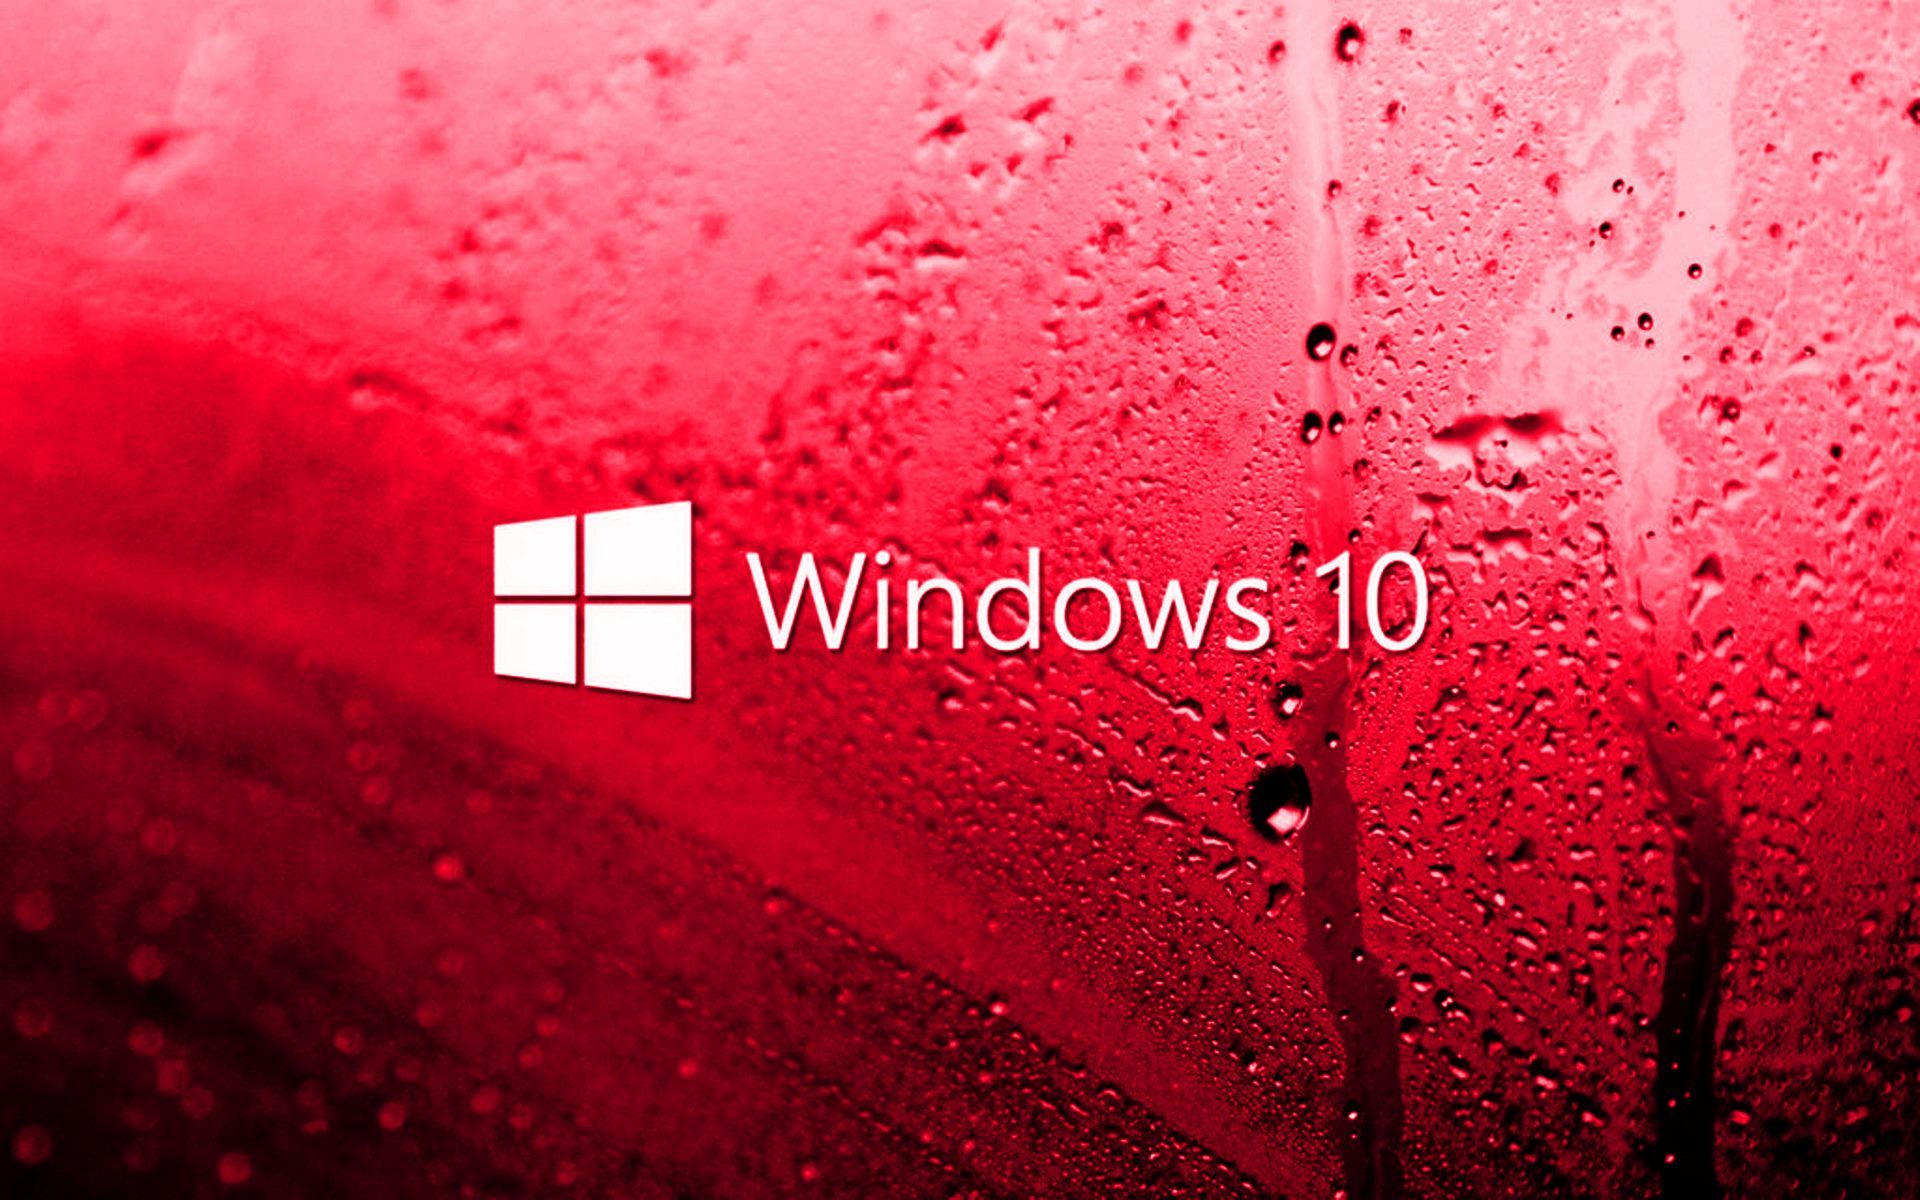 Free download Windows 10 Wallpapers